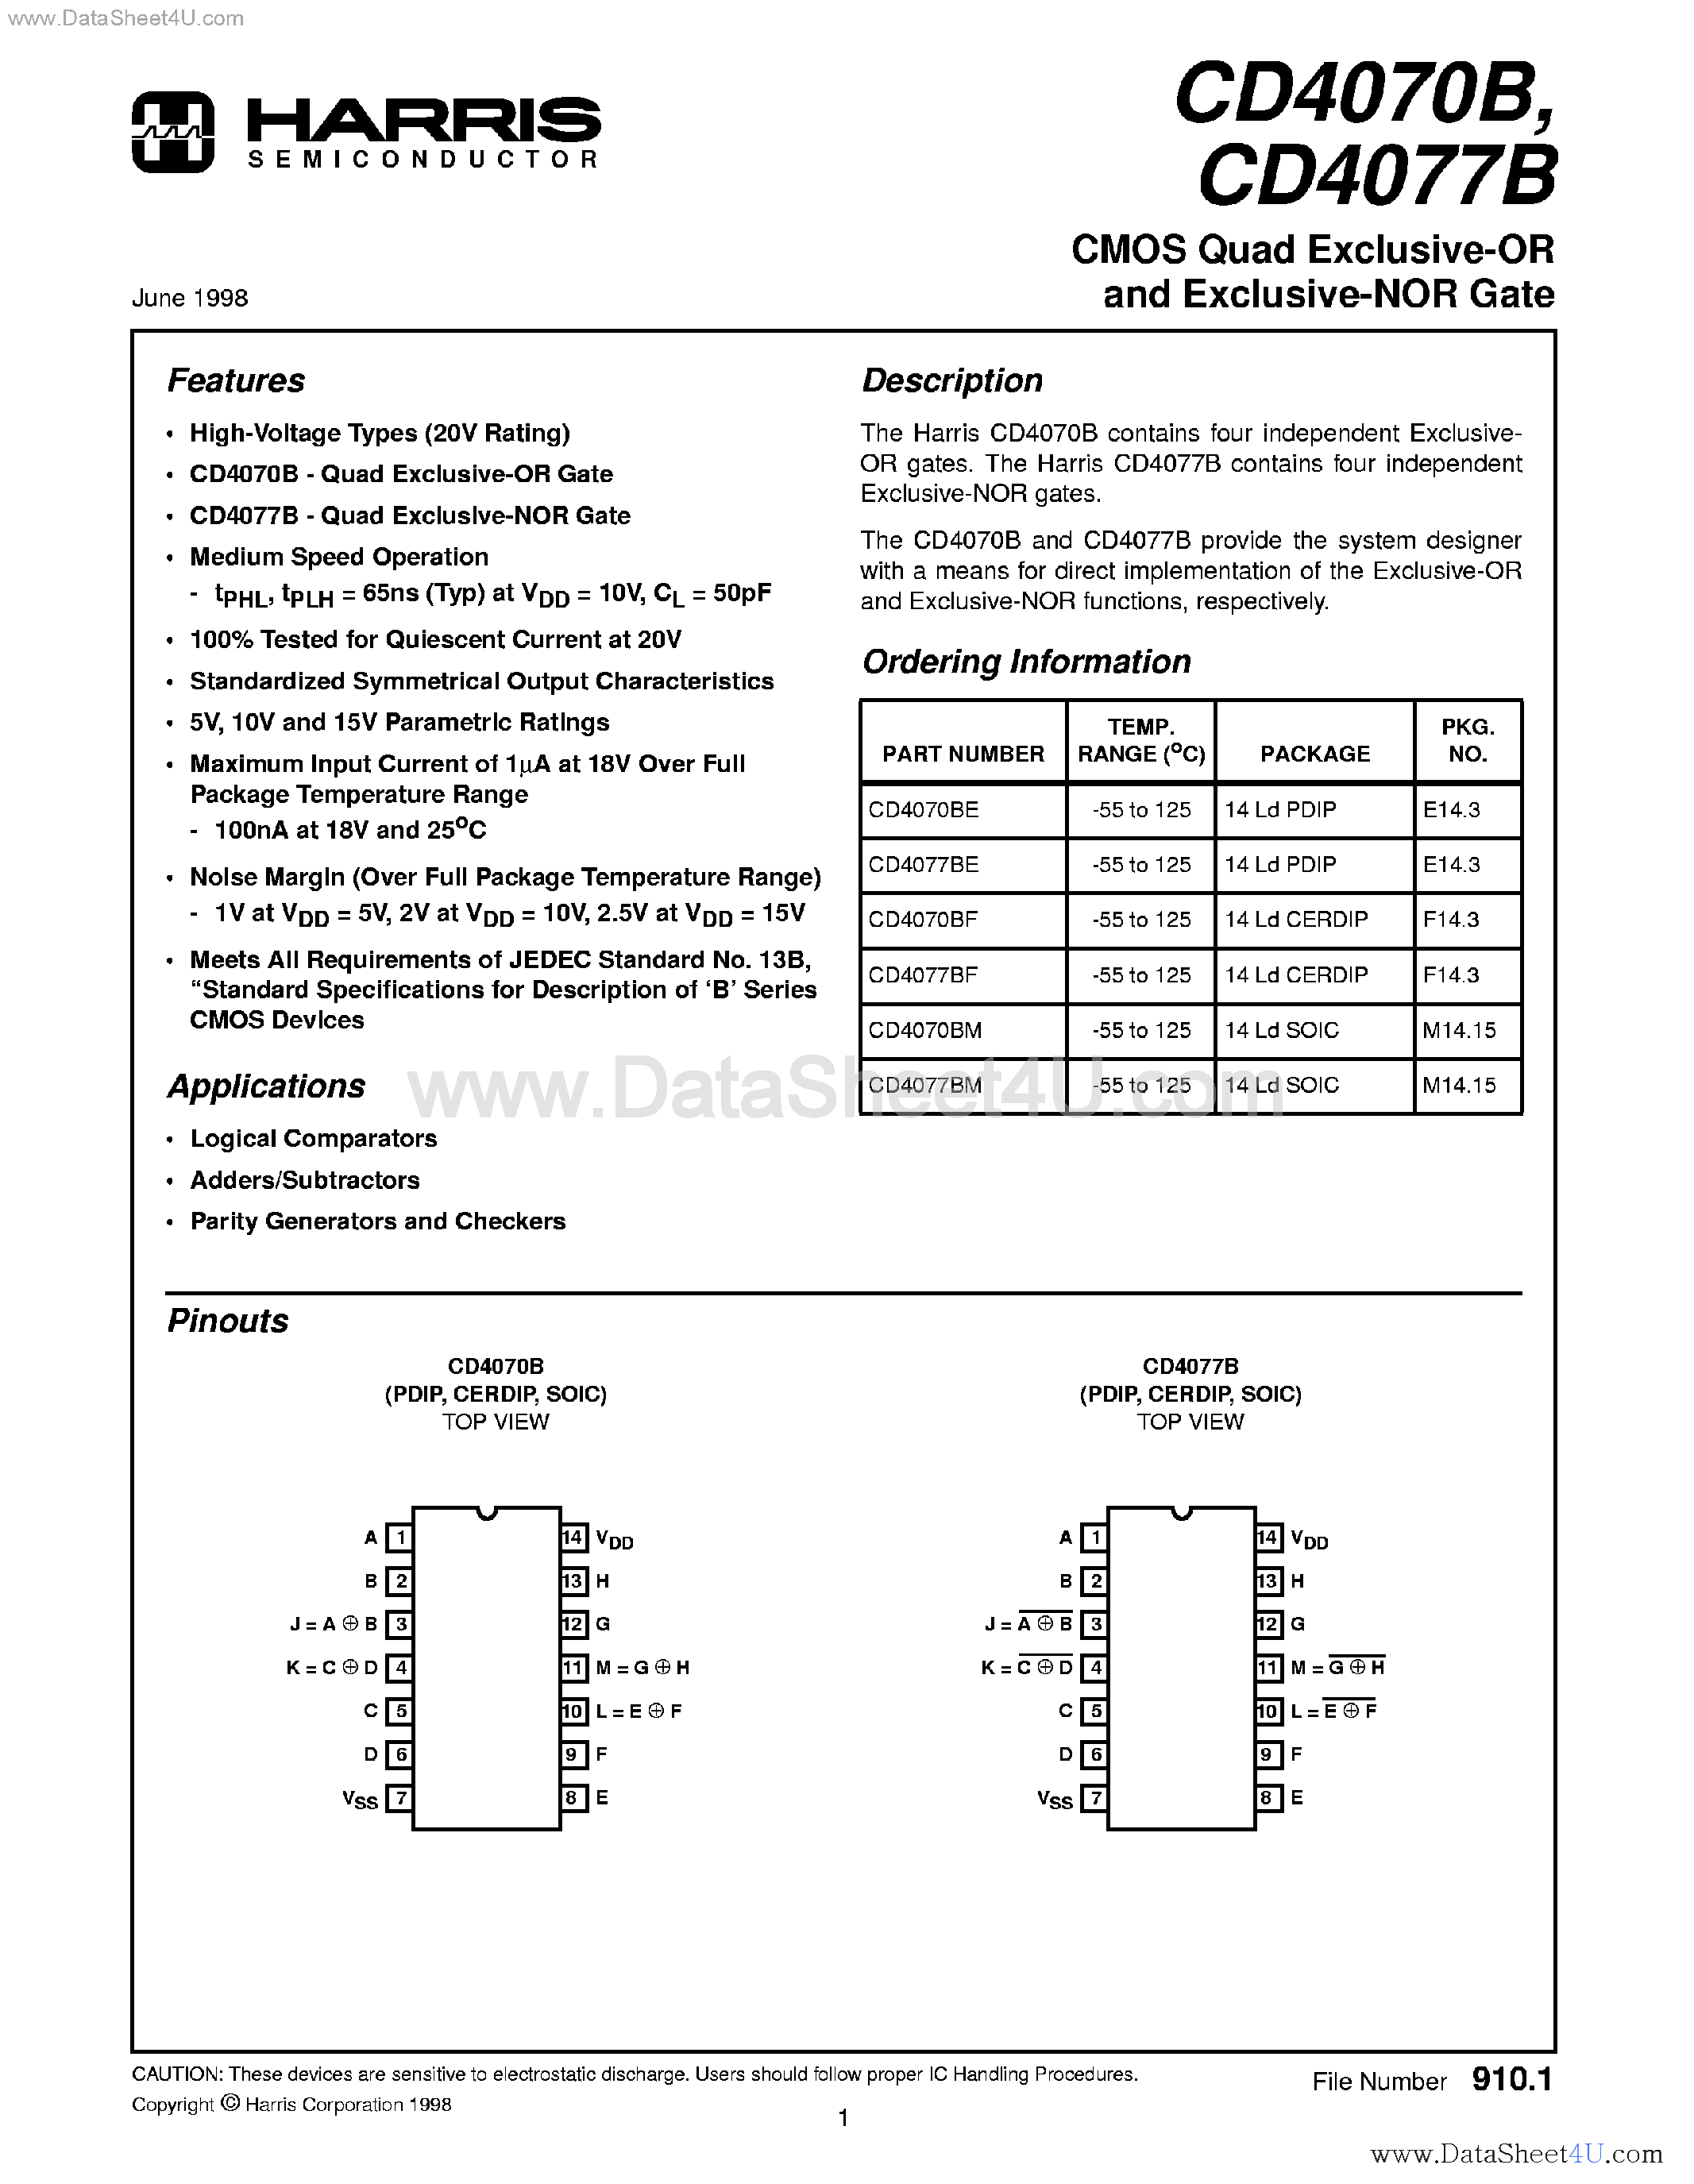 Datasheet CD4070B - (CD4070B / CD4077B) CMOS Quad Exclusive OR and Exclusive NOR Gate page 1